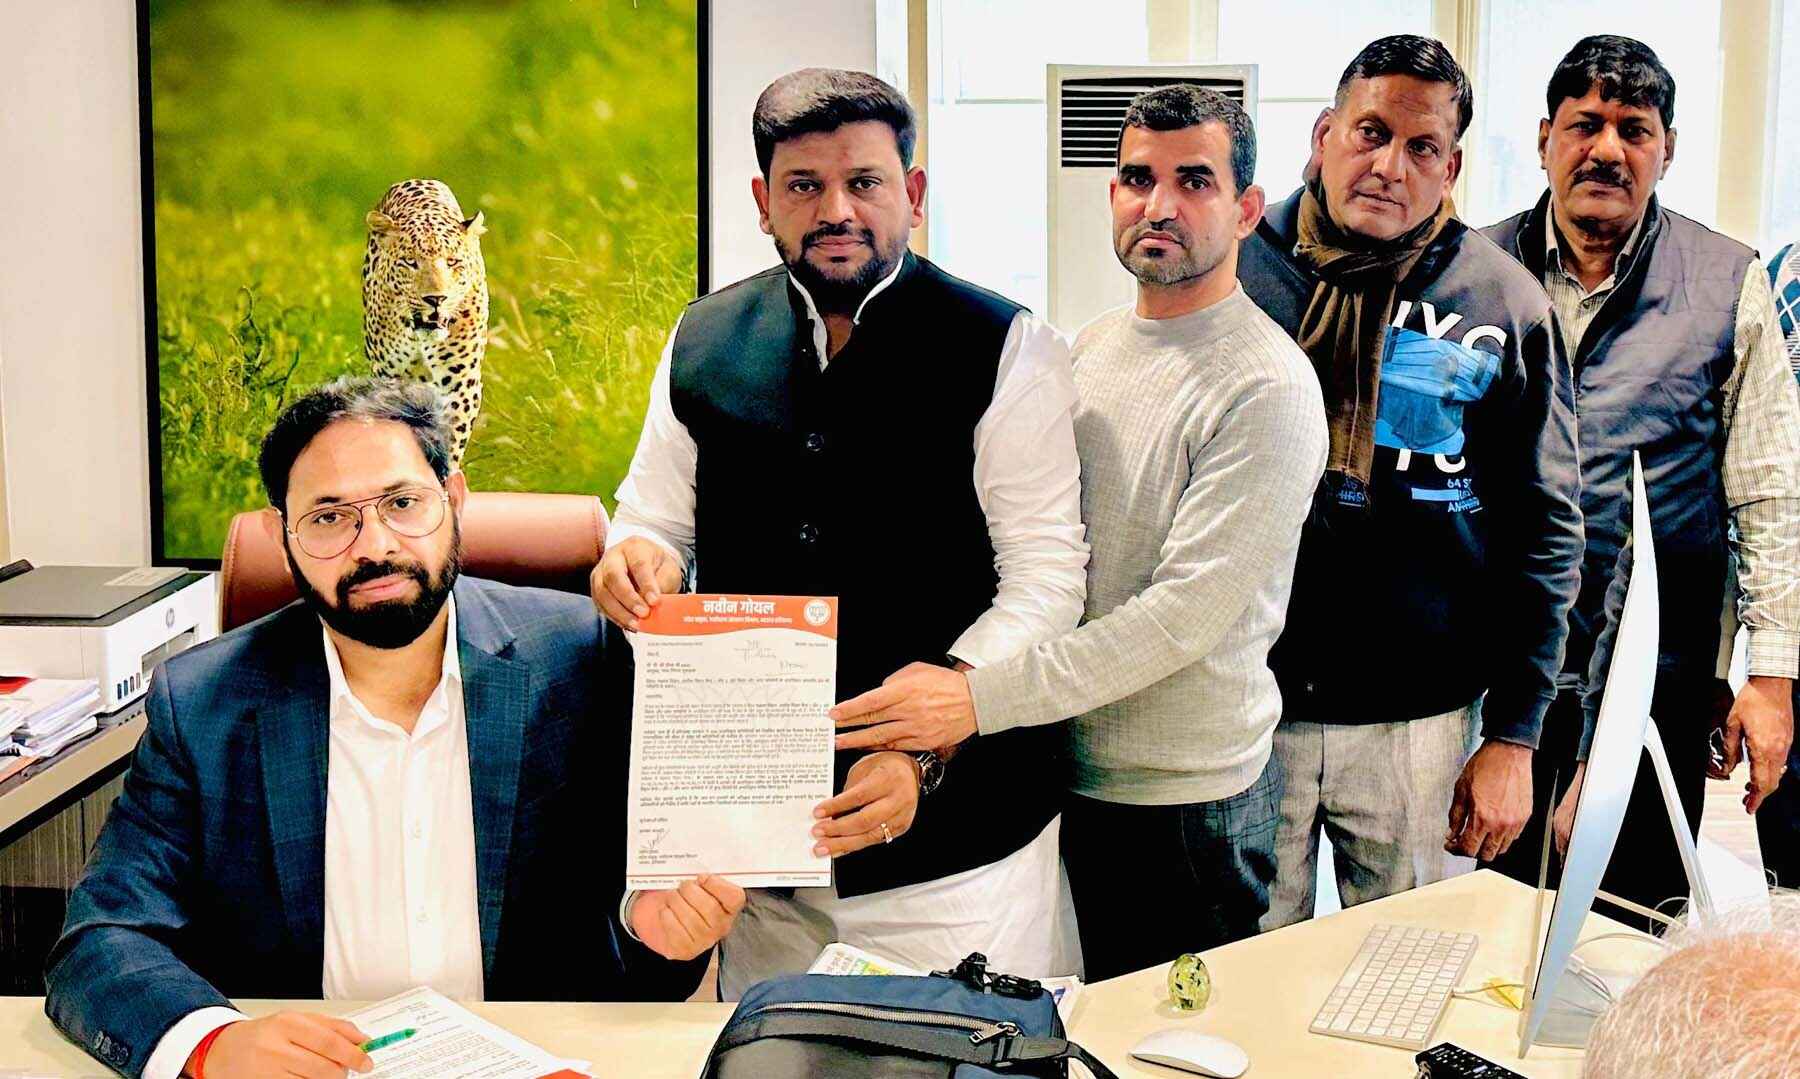 handing over the demand letter to Municipal Corporation Gurugram Commissioner PC Meena demanding to provide facilities in various areas of Gurugram